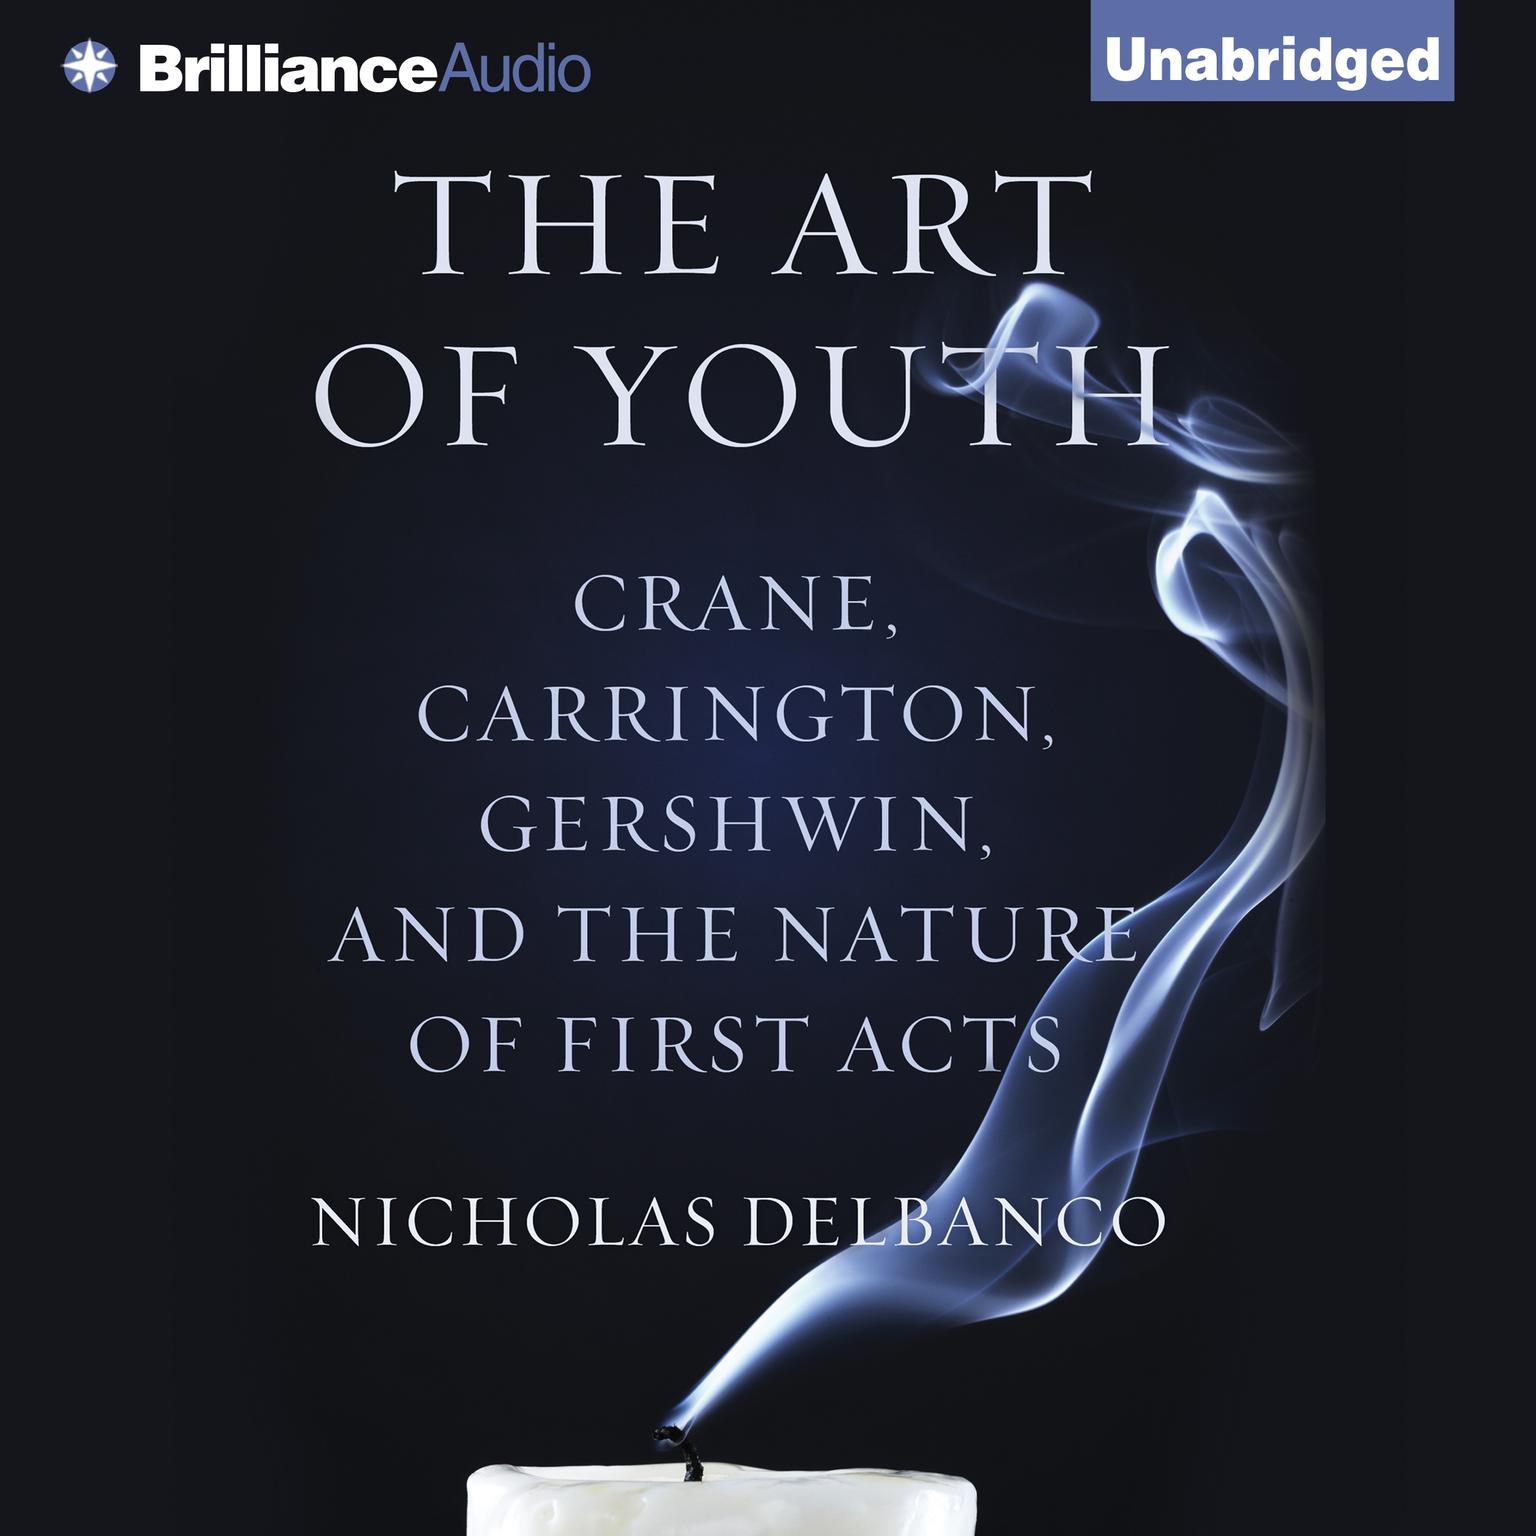 The Art of Youth: Crane, Carrington, Gershwin, and the Nature of First Acts Audiobook, by Nicholas Delbanco